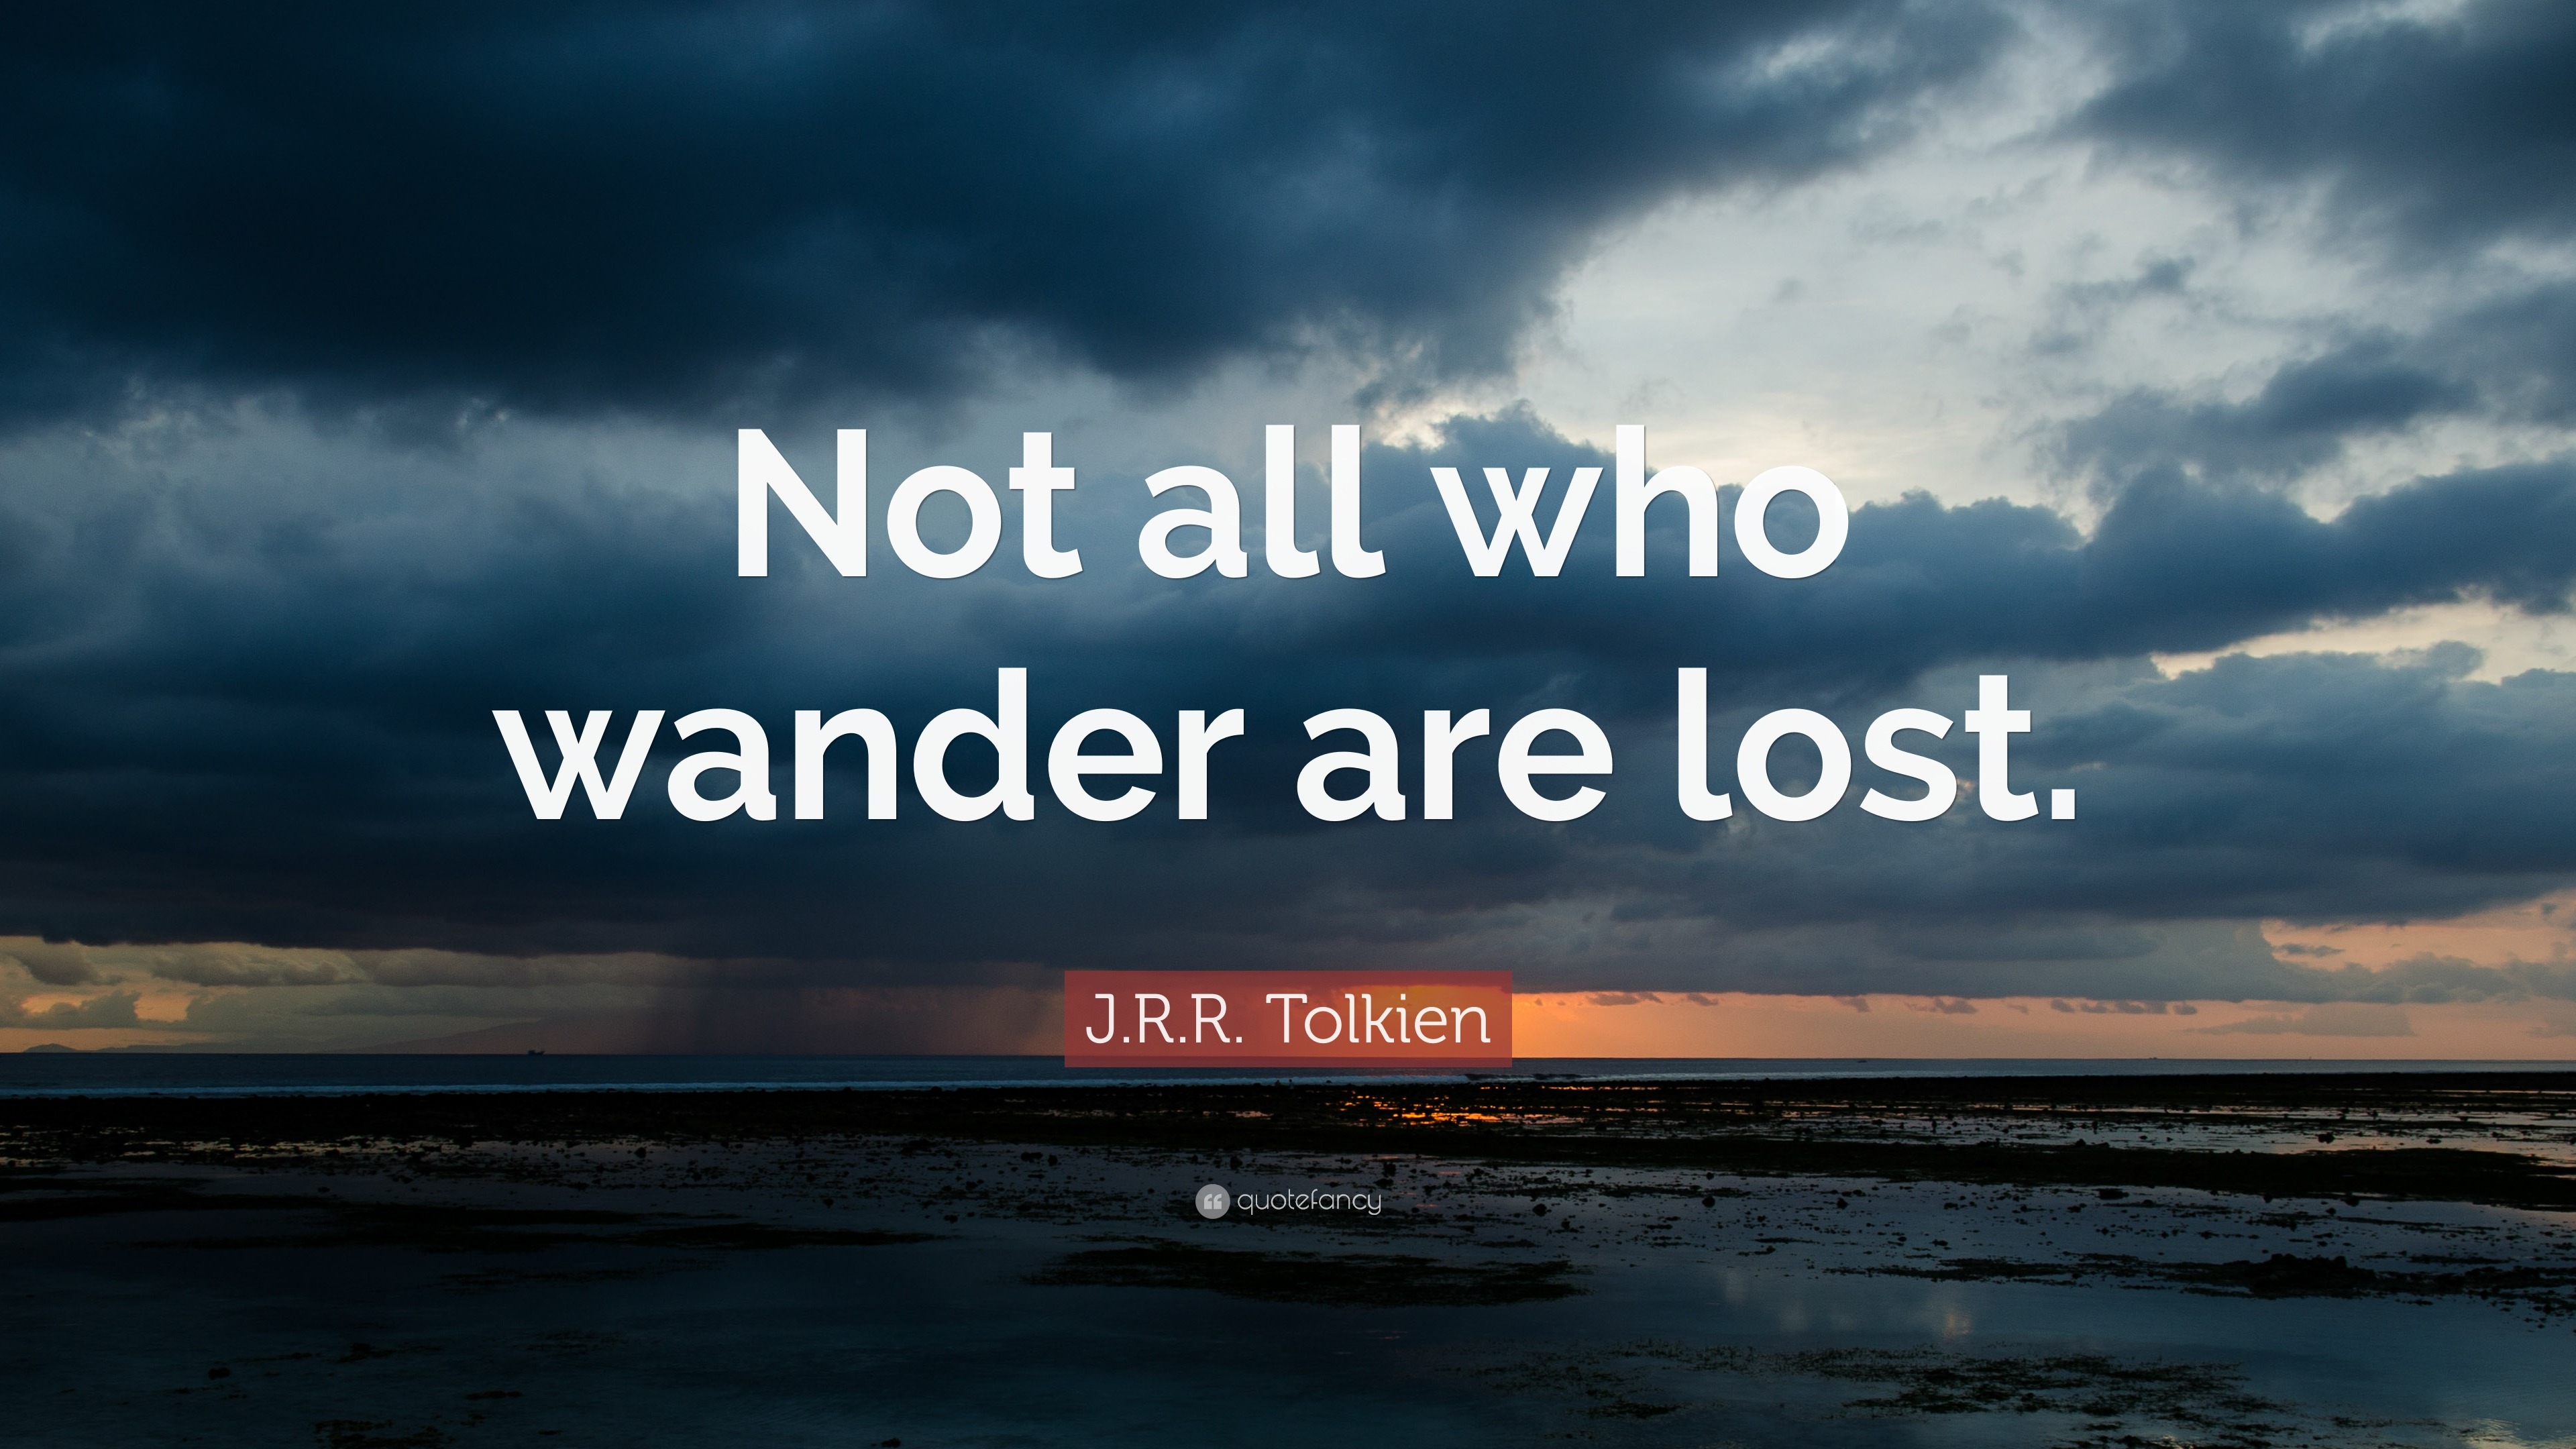 J. R. R. Tolkien Quote: “Not all who wander are lost.”